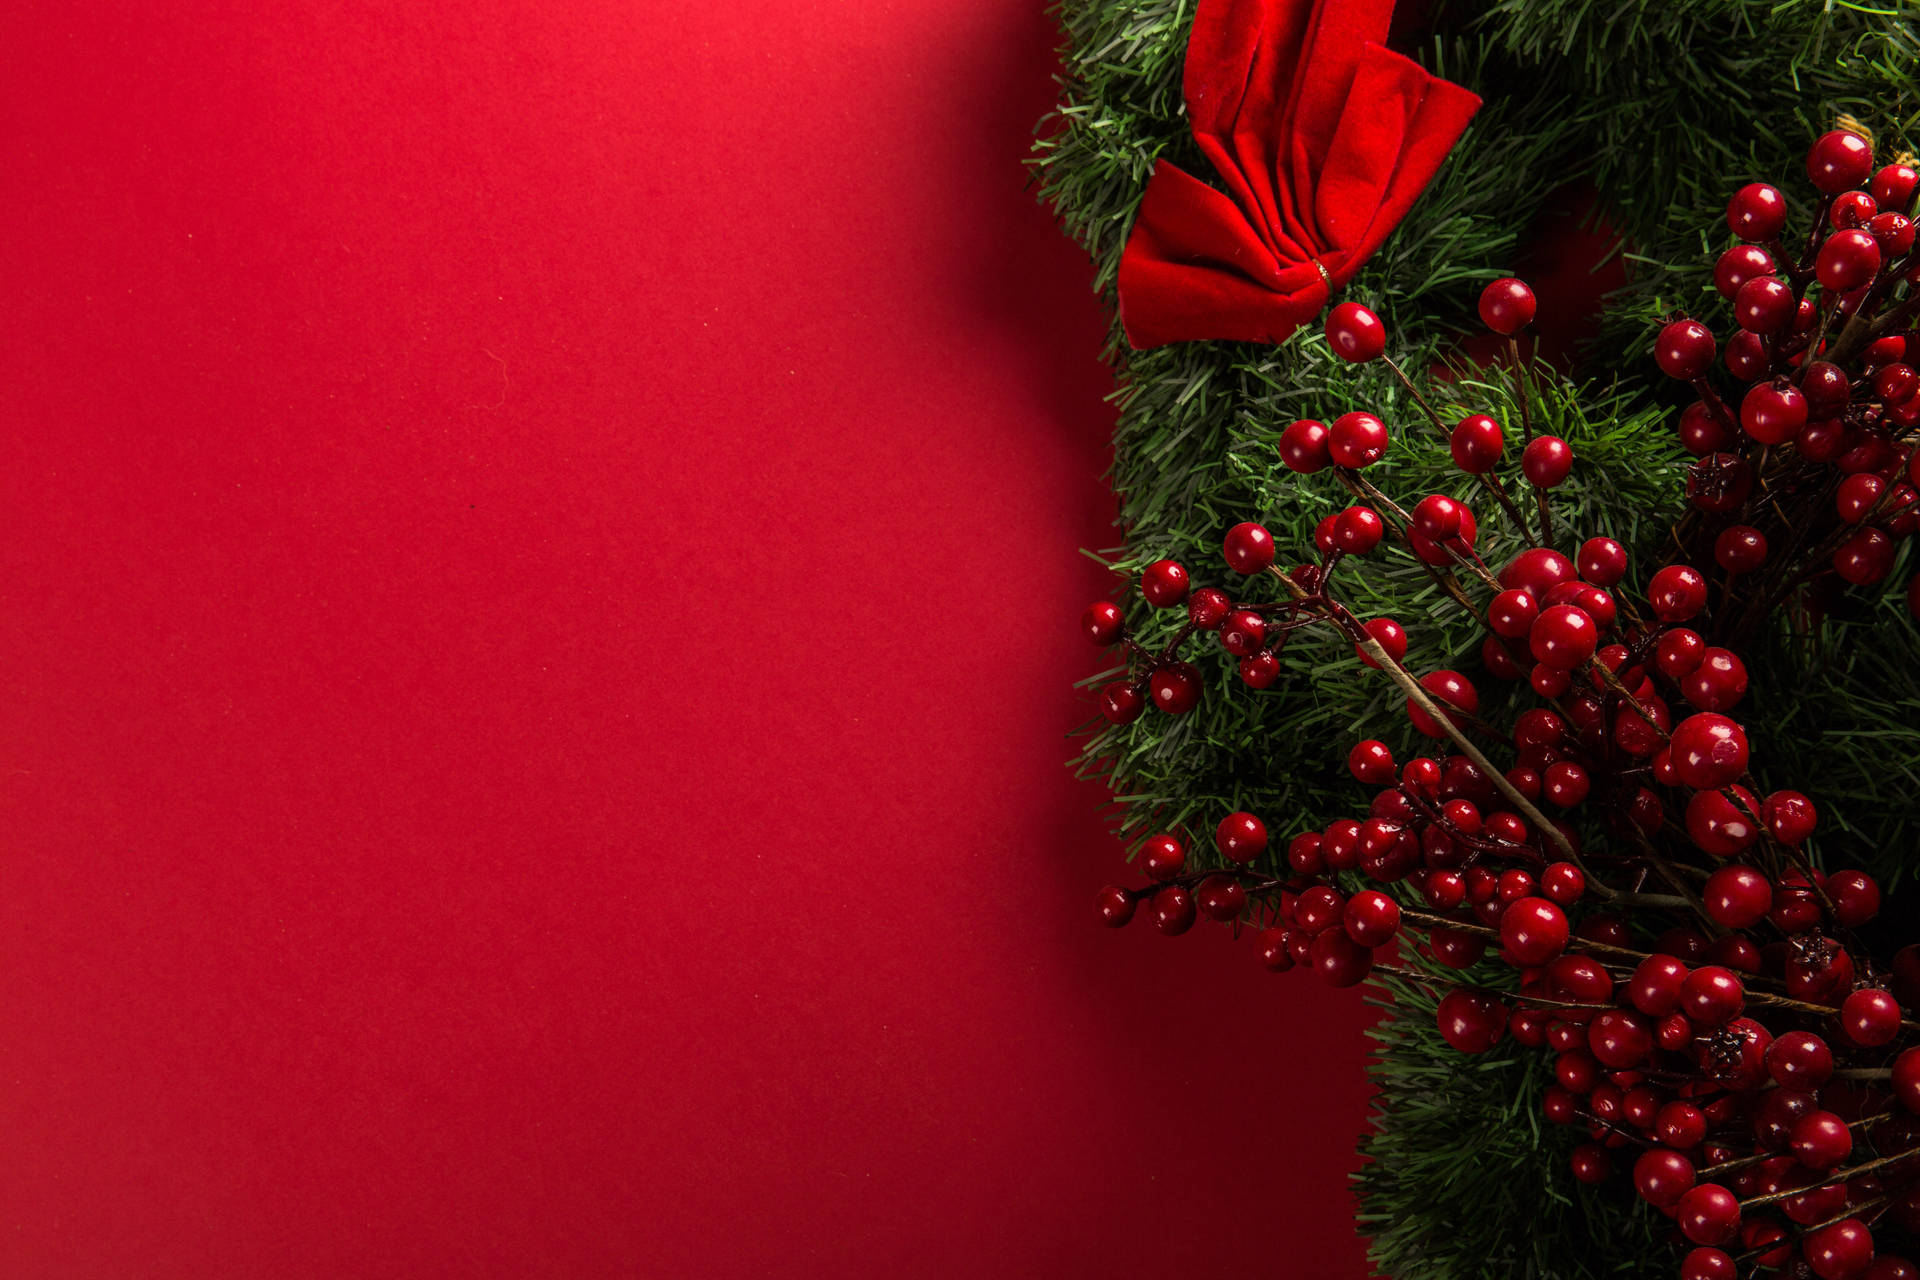 Perfect For The Holiday Season: A Red Christmas Wreath Set Against A White Wall Background